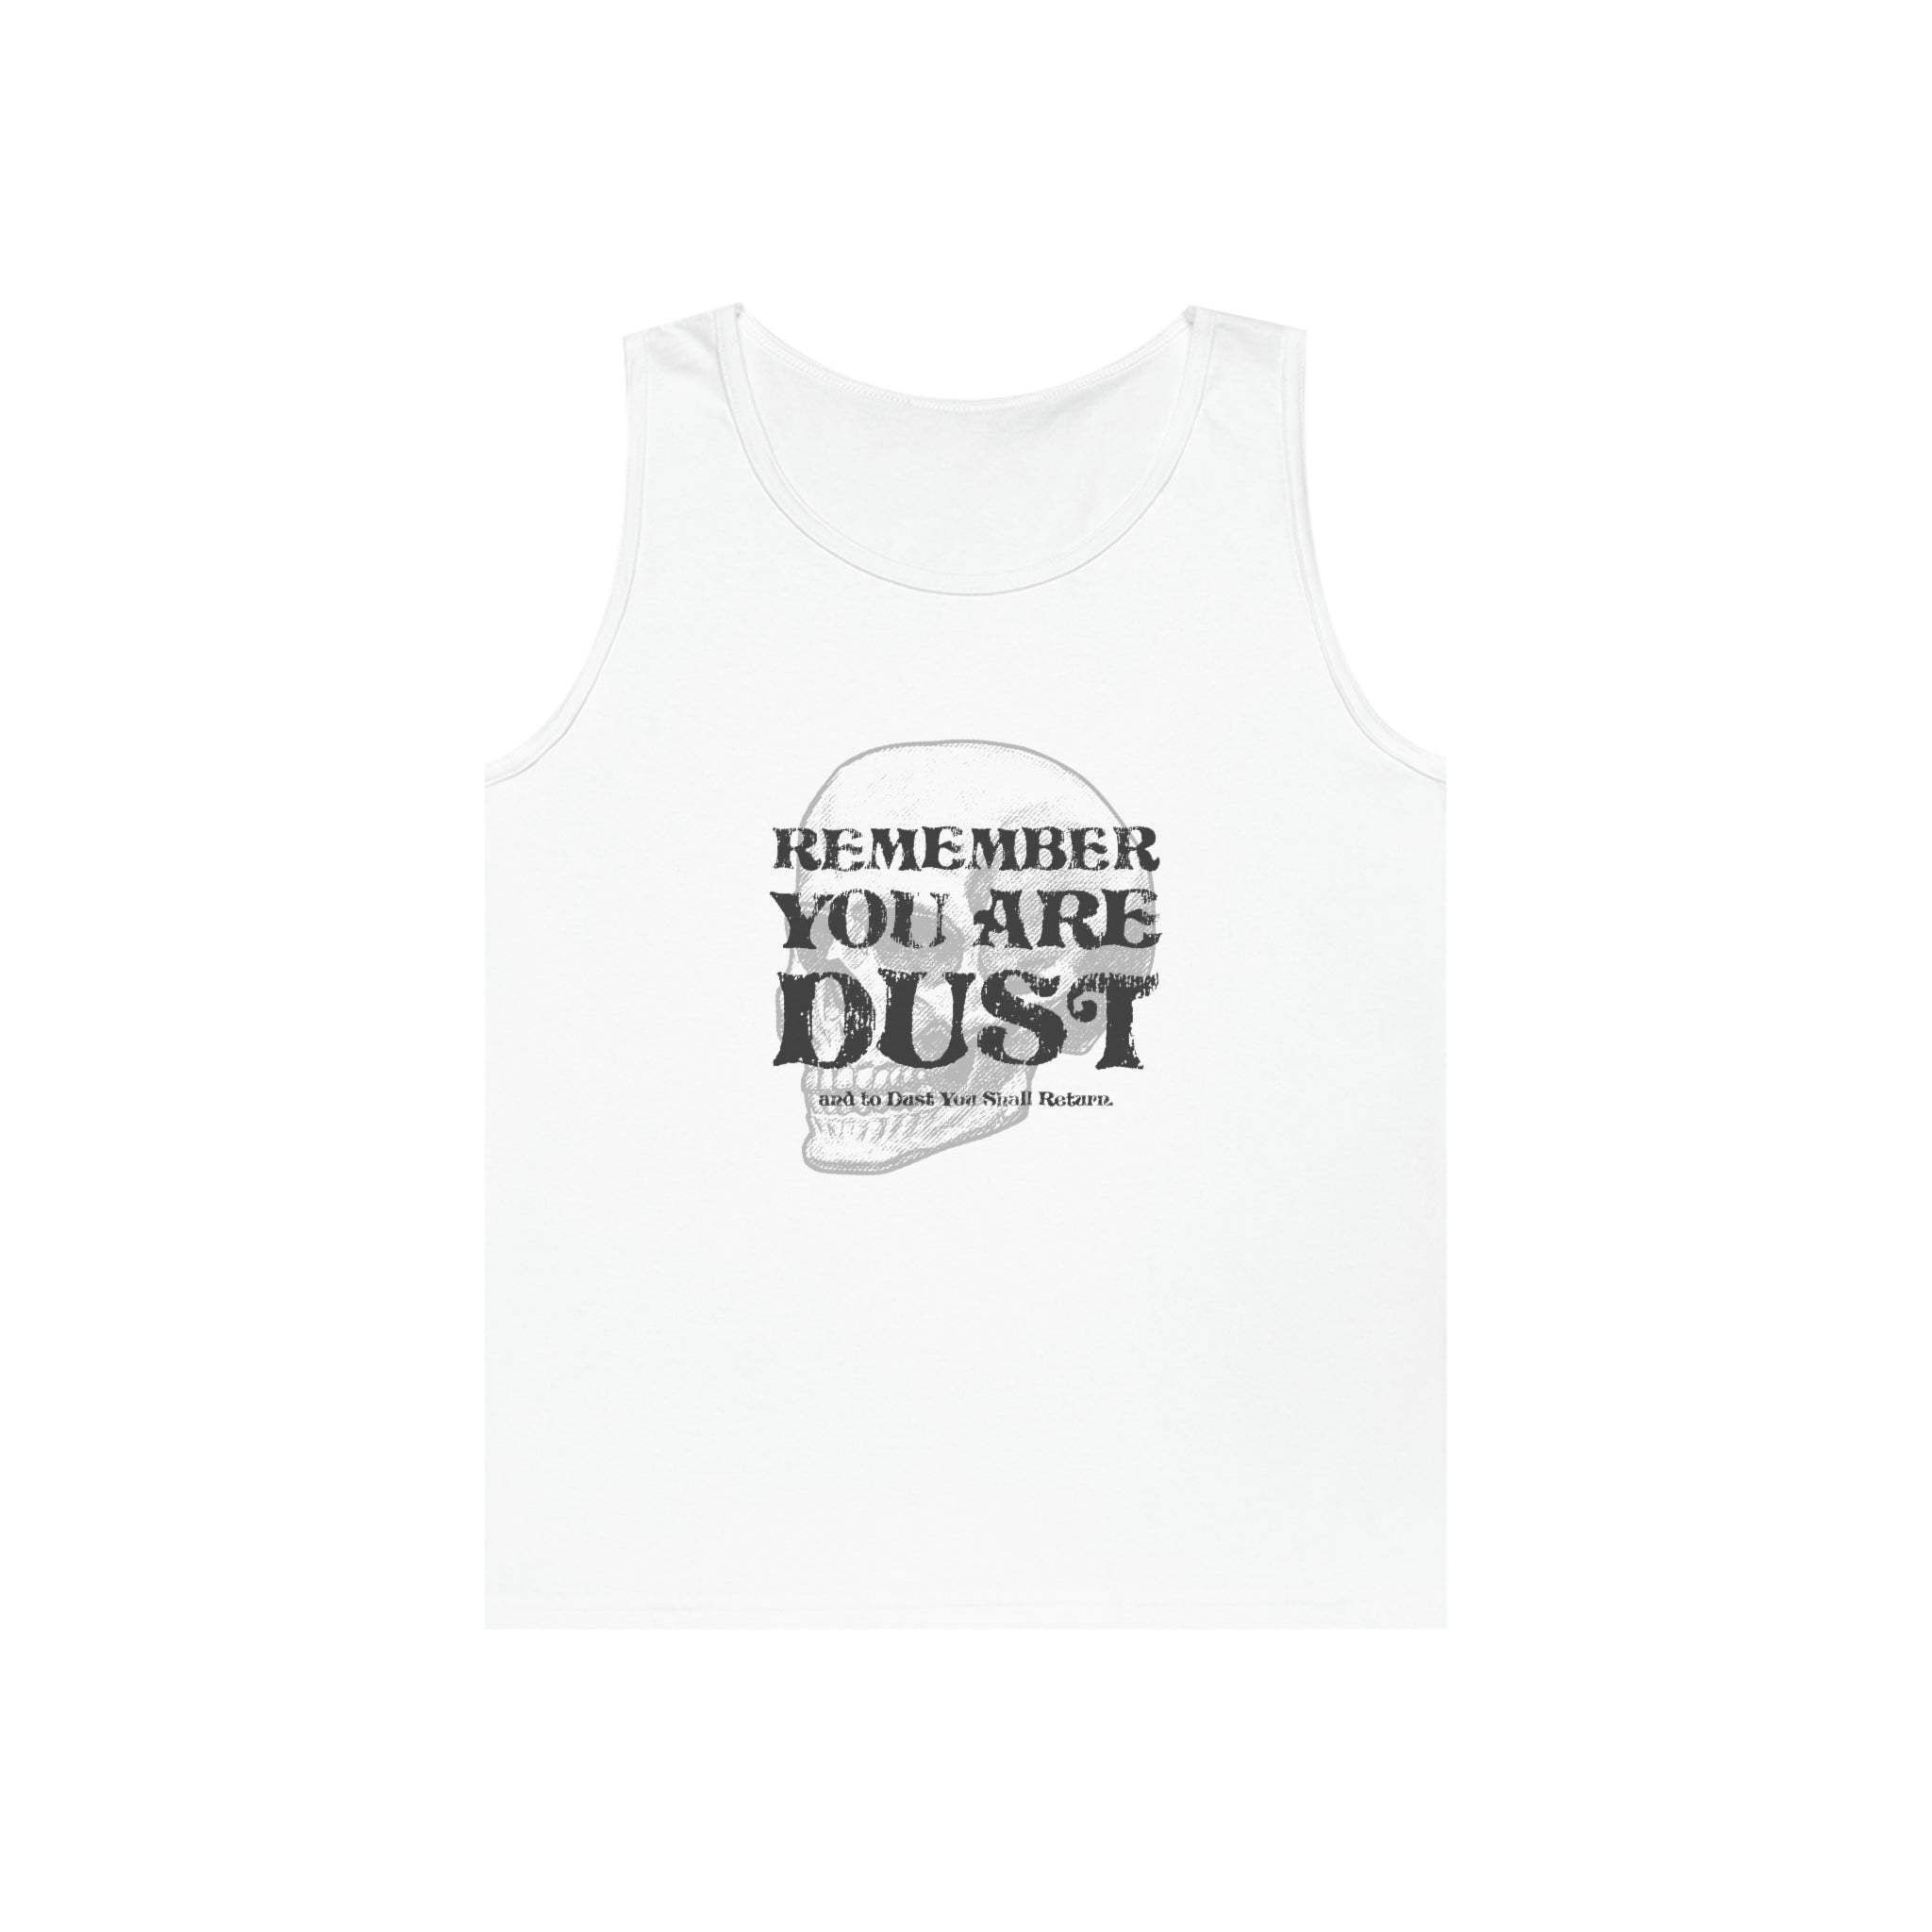 Men's You Are Dust Tank Top